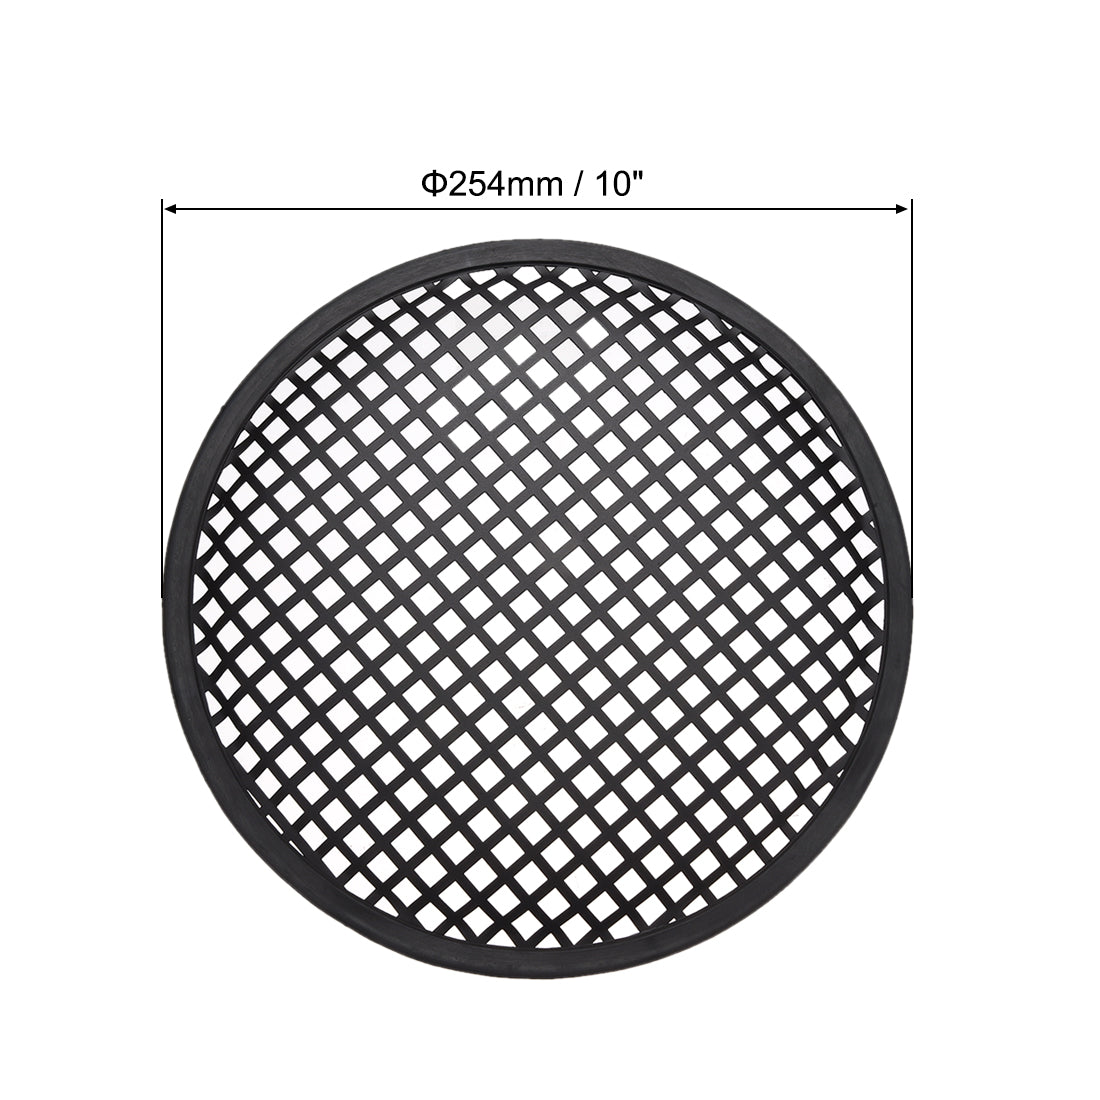 uxcell Uxcell Speaker Grill Cover 10 Inch 254mm Mesh Decorative Circle Subwoofer Guard Protector with Accessories Black